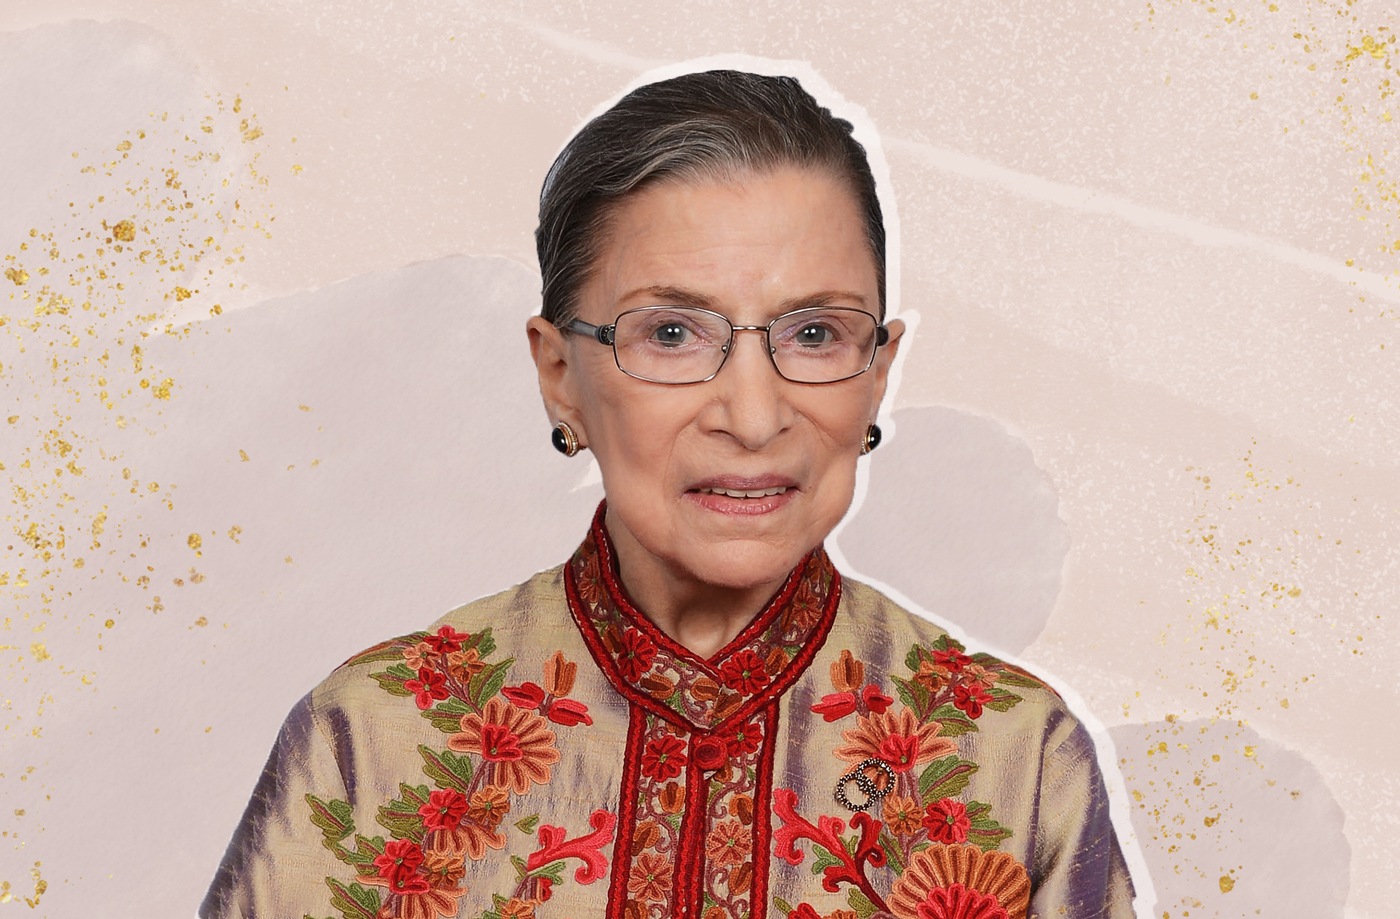 The top 10 self-care practices we want RBG to do while she's on the mend